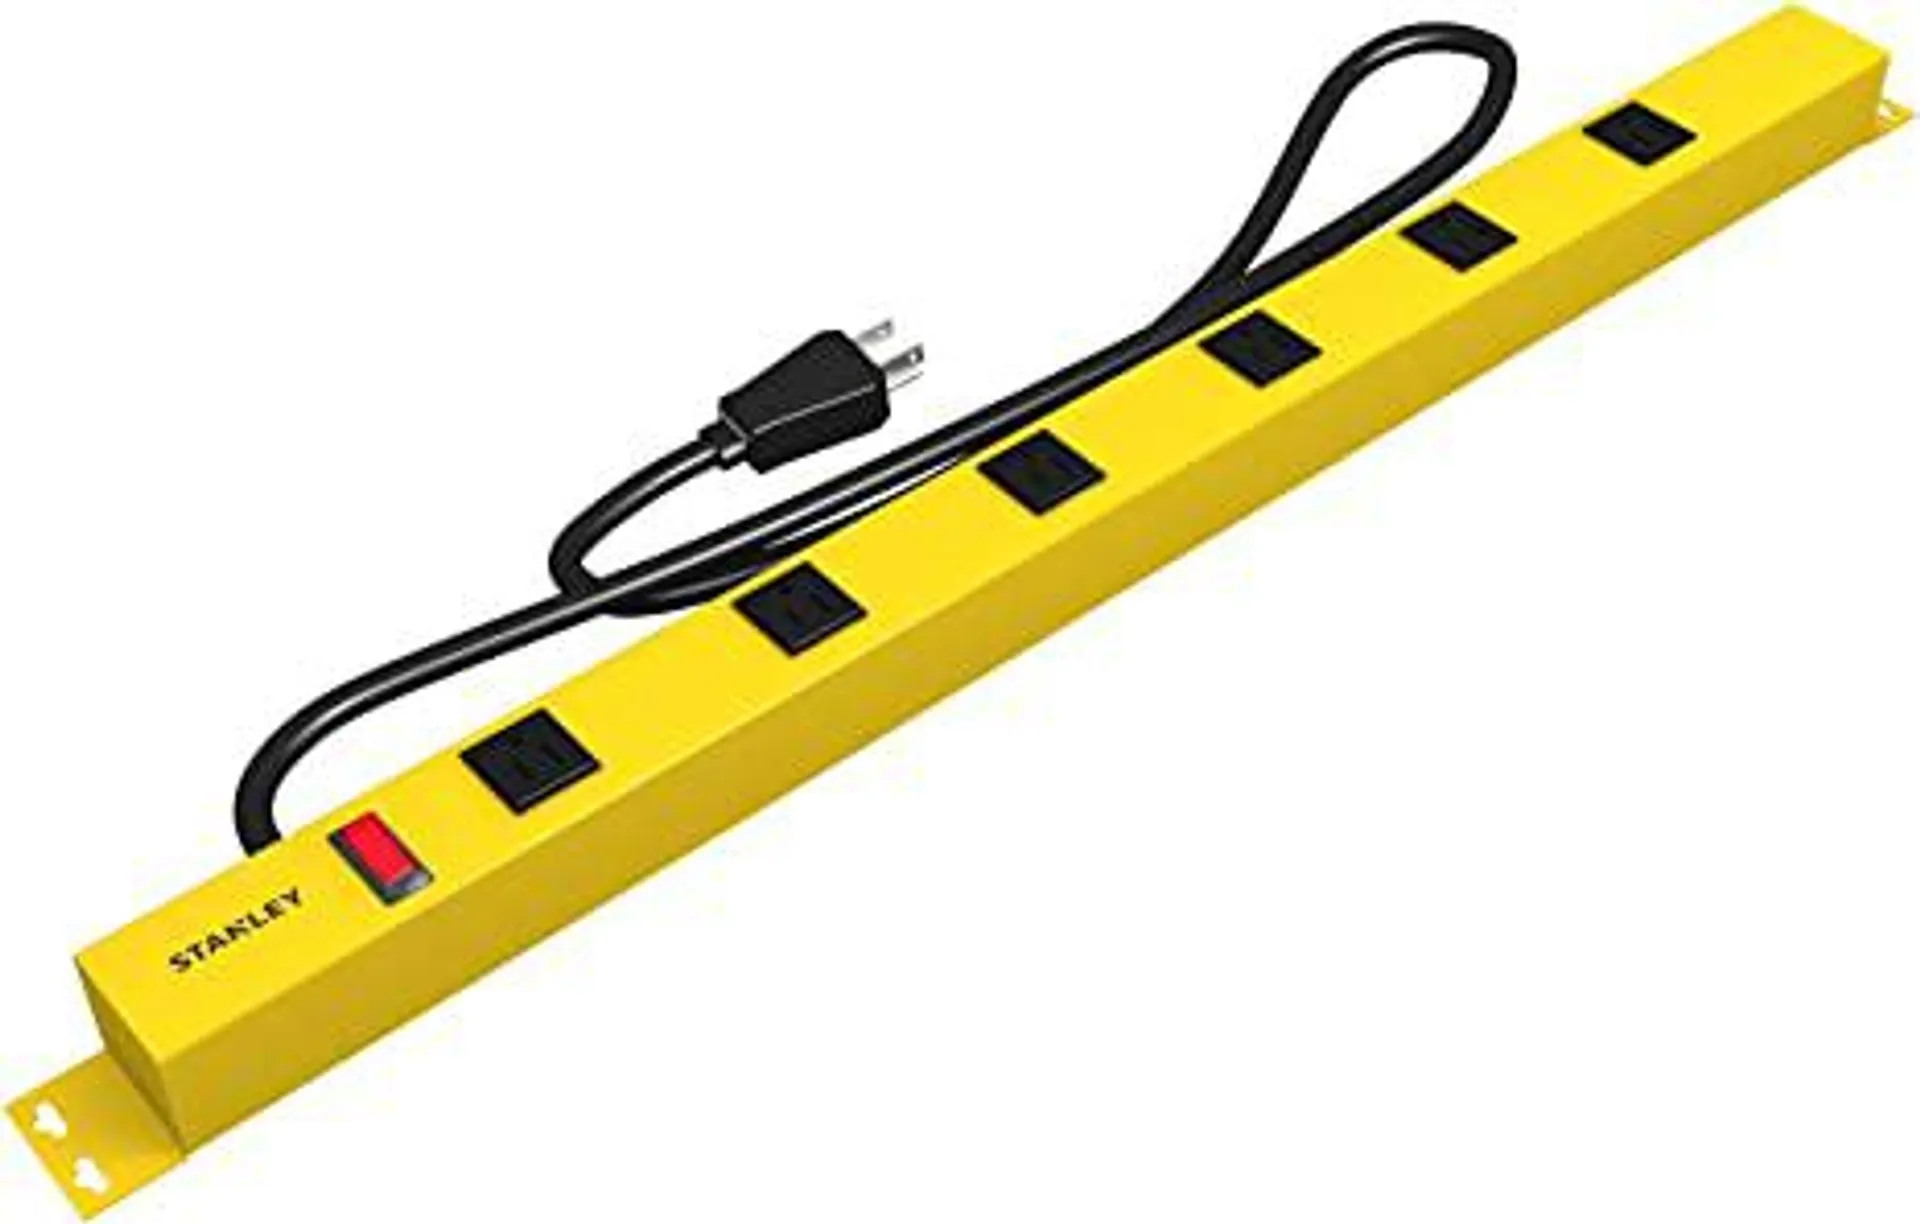 Stanley 31613 NCC31613 ShopMAX Pro 6-Outlet Surge-Protector Power Bar, 4-Foot Cord, Yellow